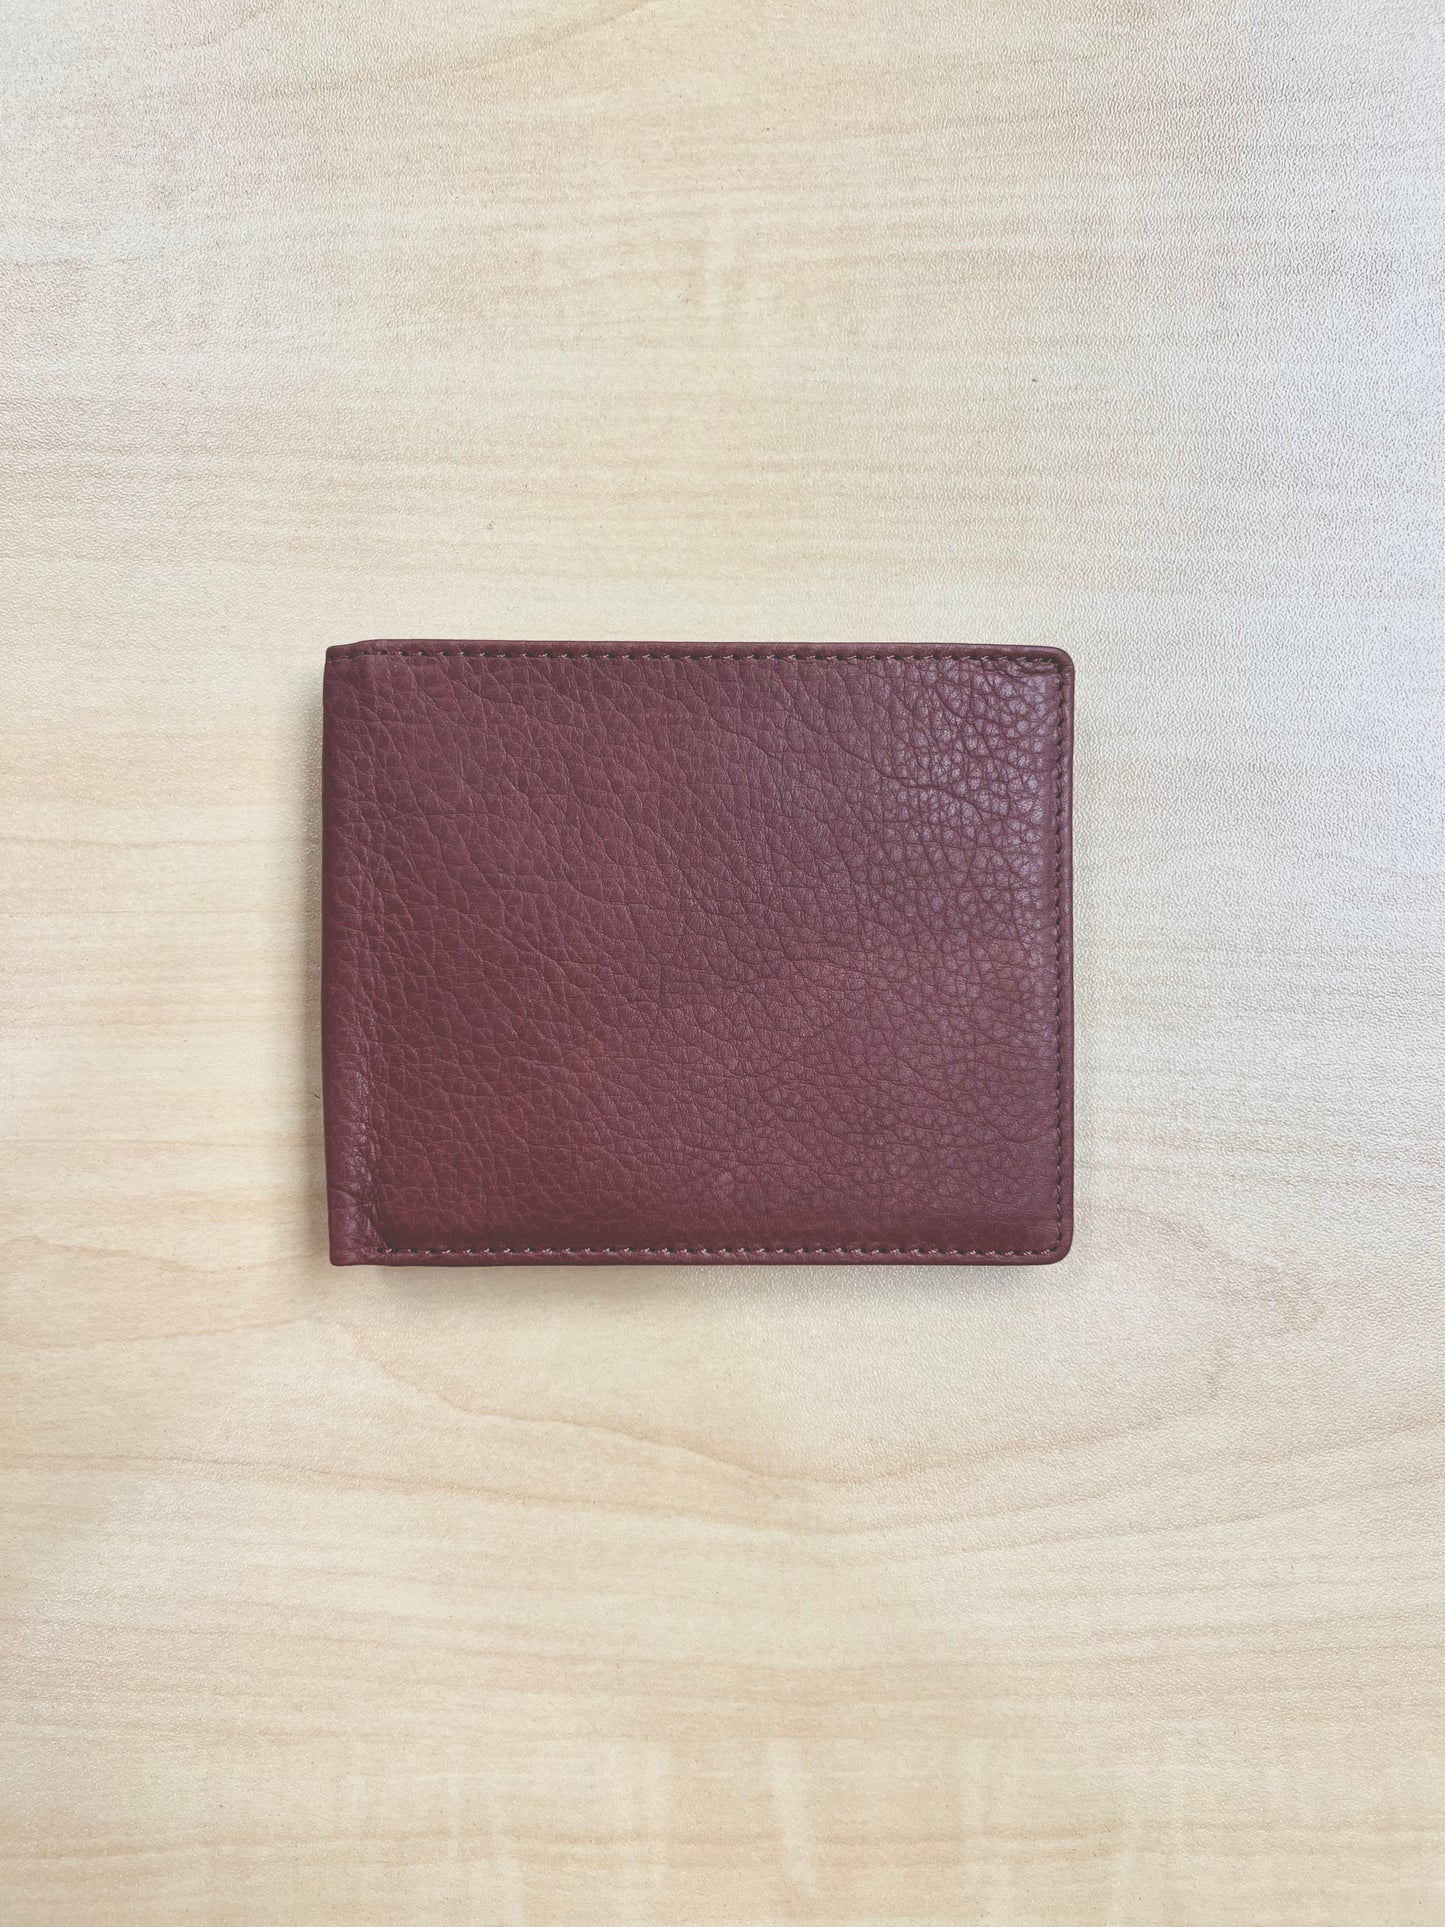 Osgoode Marley anti-RFID ID Thinfold Leather Bifold Wallet